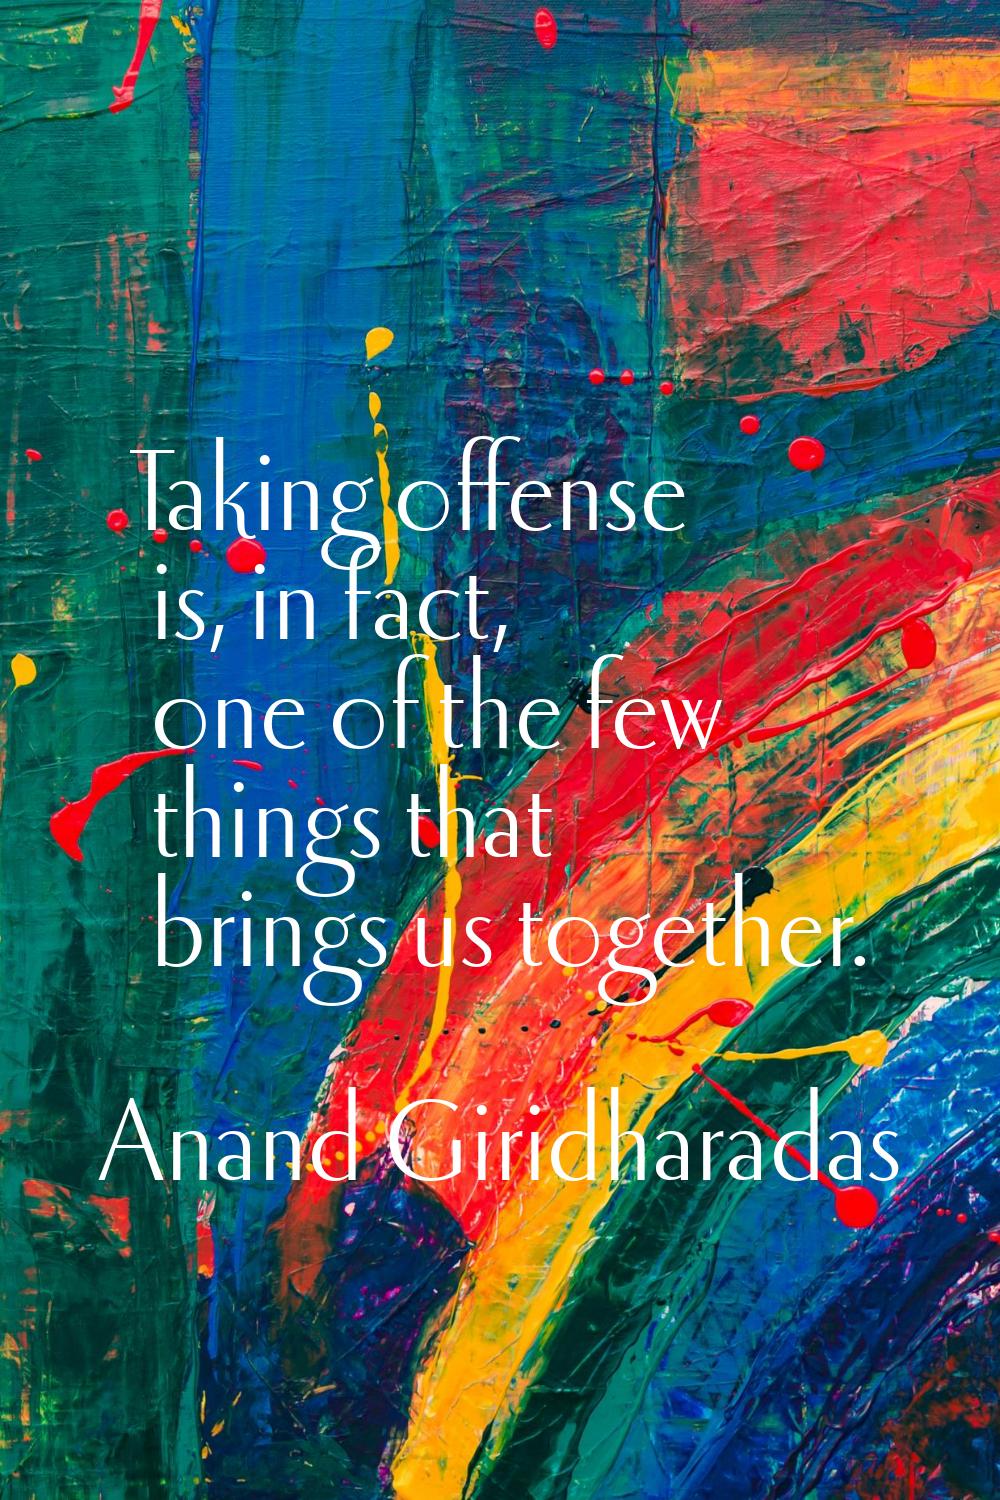 Taking offense is, in fact, one of the few things that brings us together.